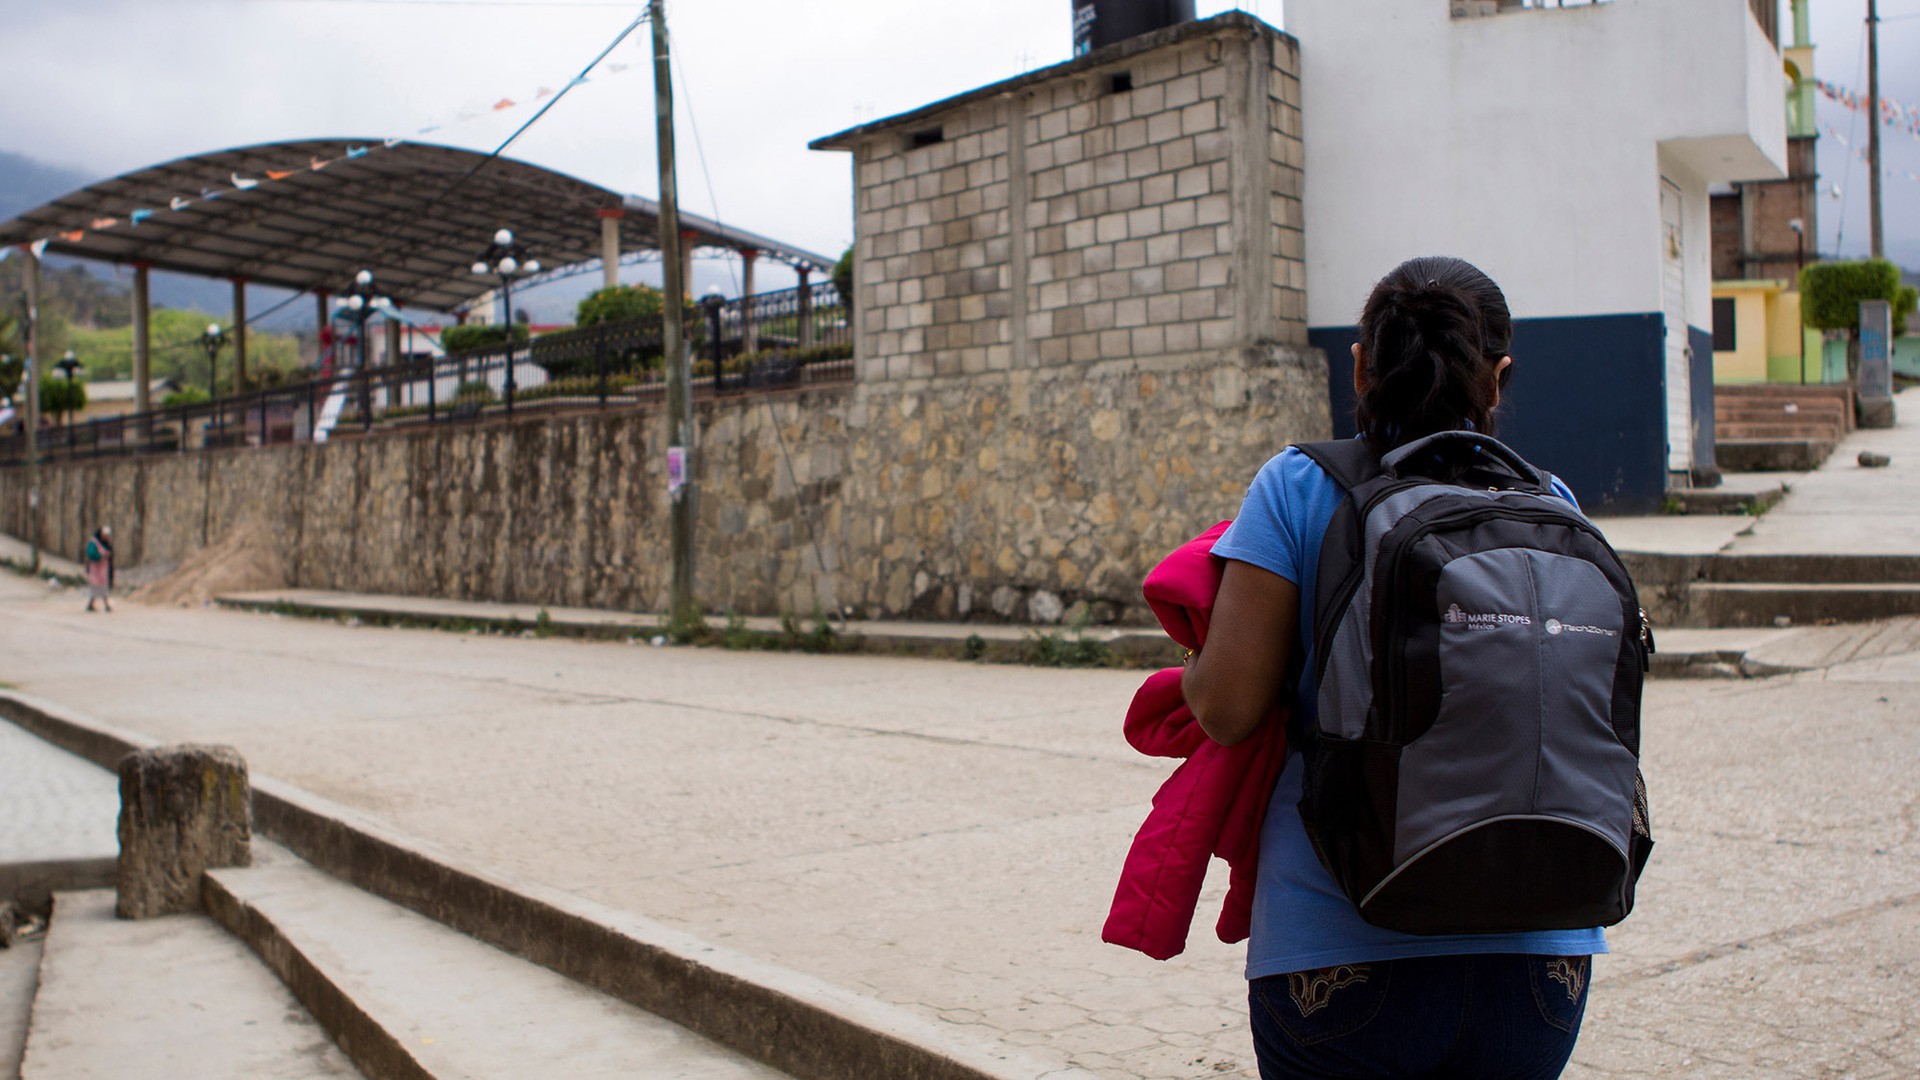 Maria López Mendoza, a health promoter for Marie Stopes International, walks through Bochil, one of the cities in Chiapas where she distributes contraceptives to midwives. Normally she will visit each midwife two to three times a month. (Photo by Alex Lancial.)